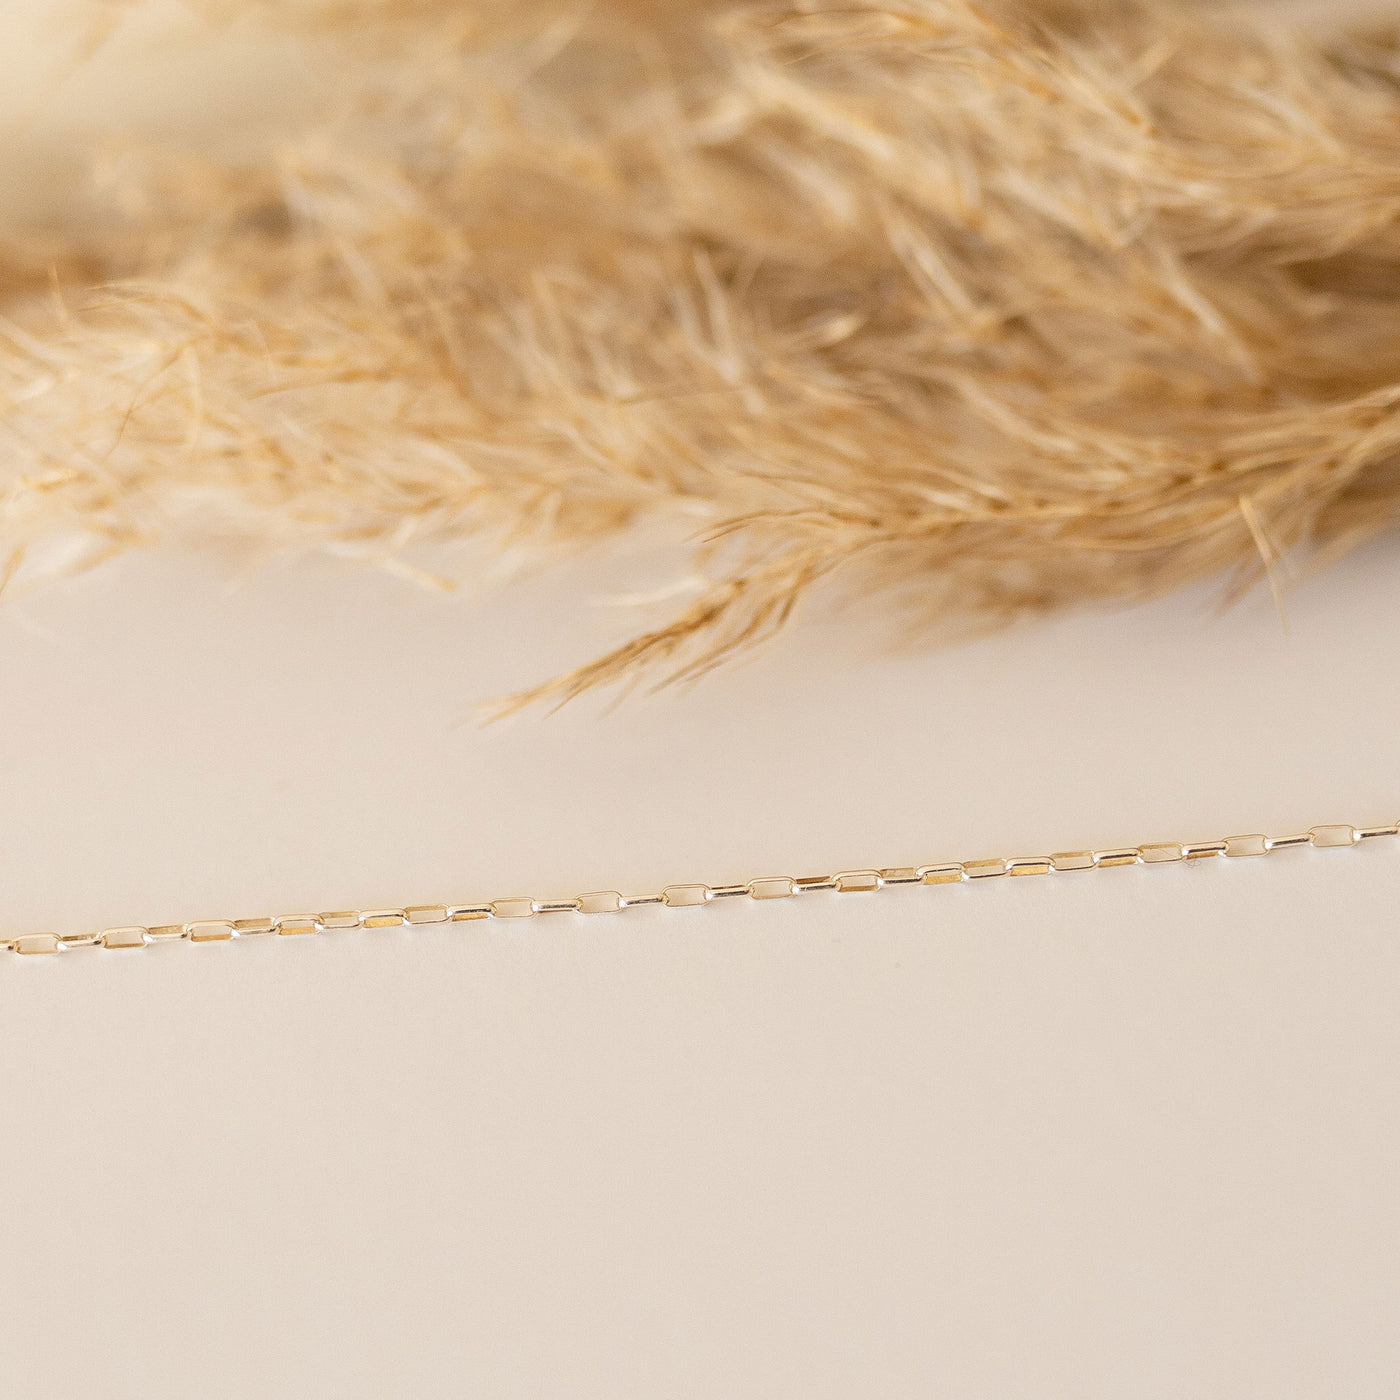 Delicate Elongated Oval Necklace